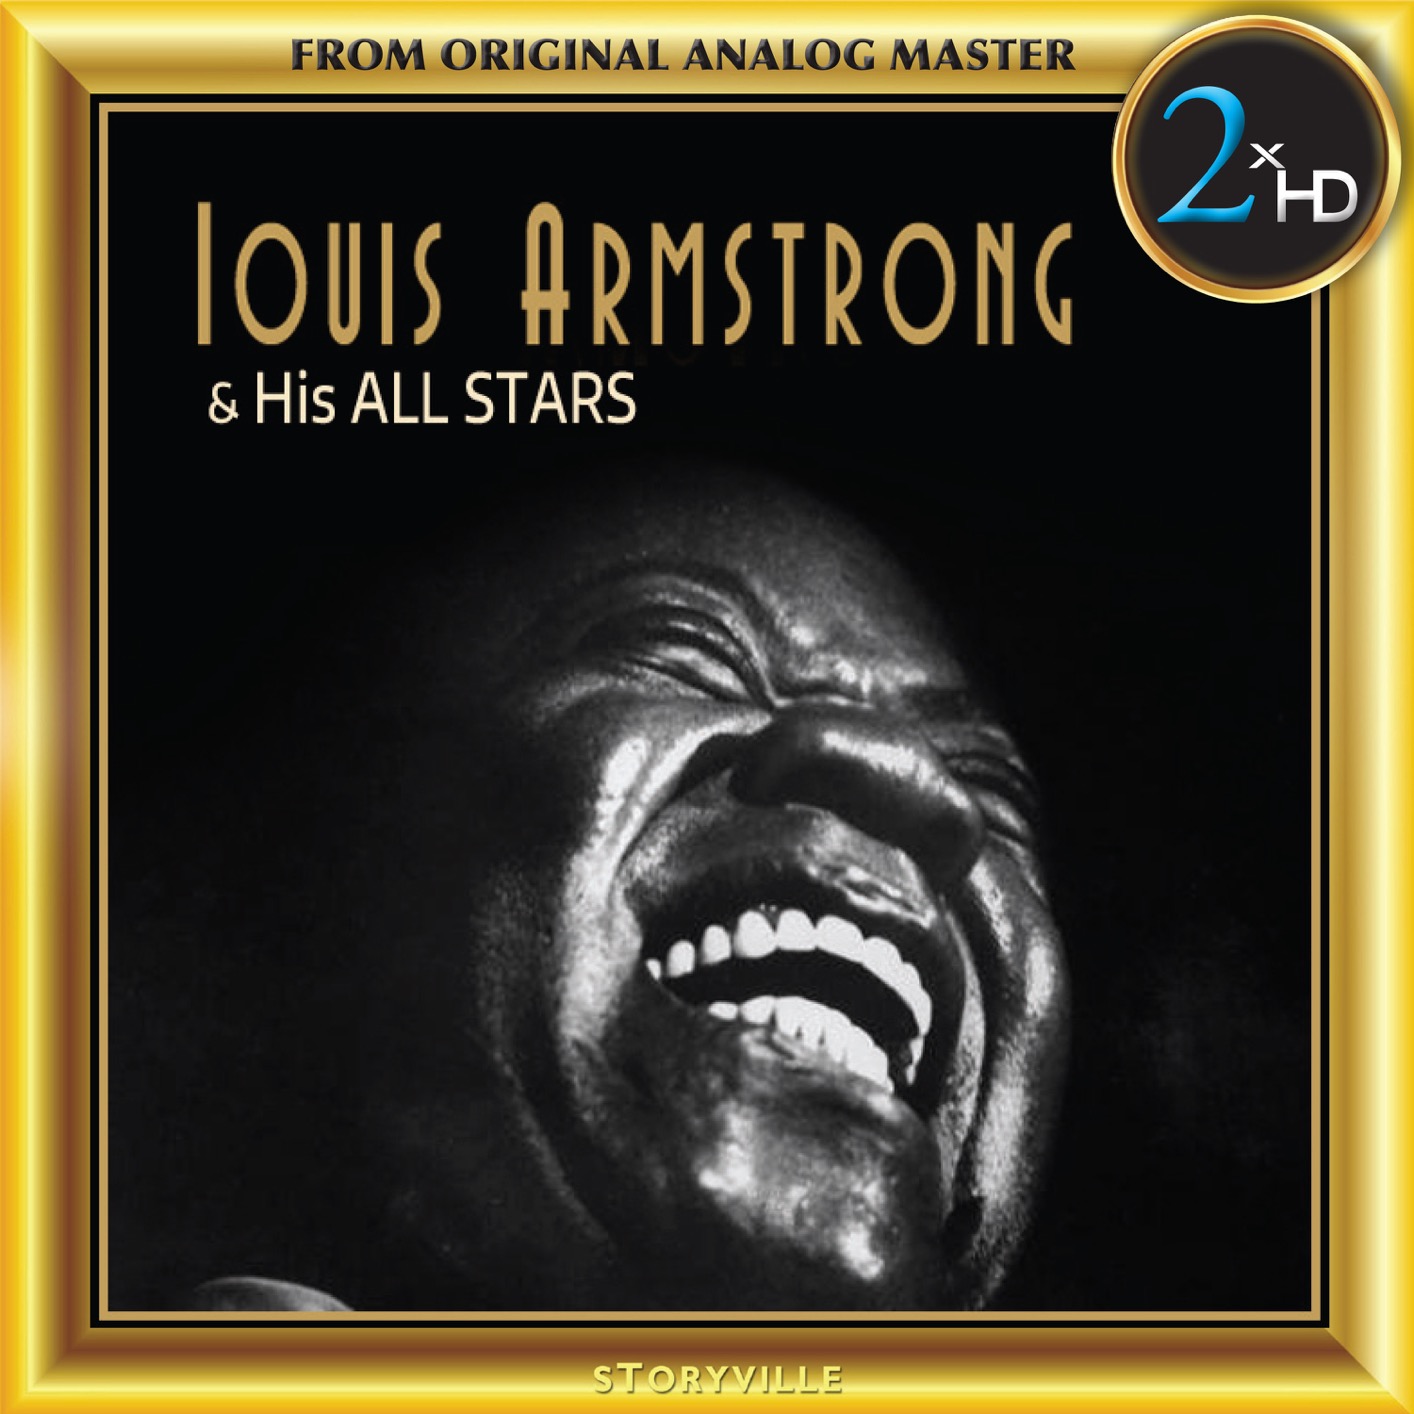 Louis Armstrong – Louis Armstrong & His All Stars (2018) [HDTracks DSF DSD128/5.64MHz + FLAC 24bit/96kHz]